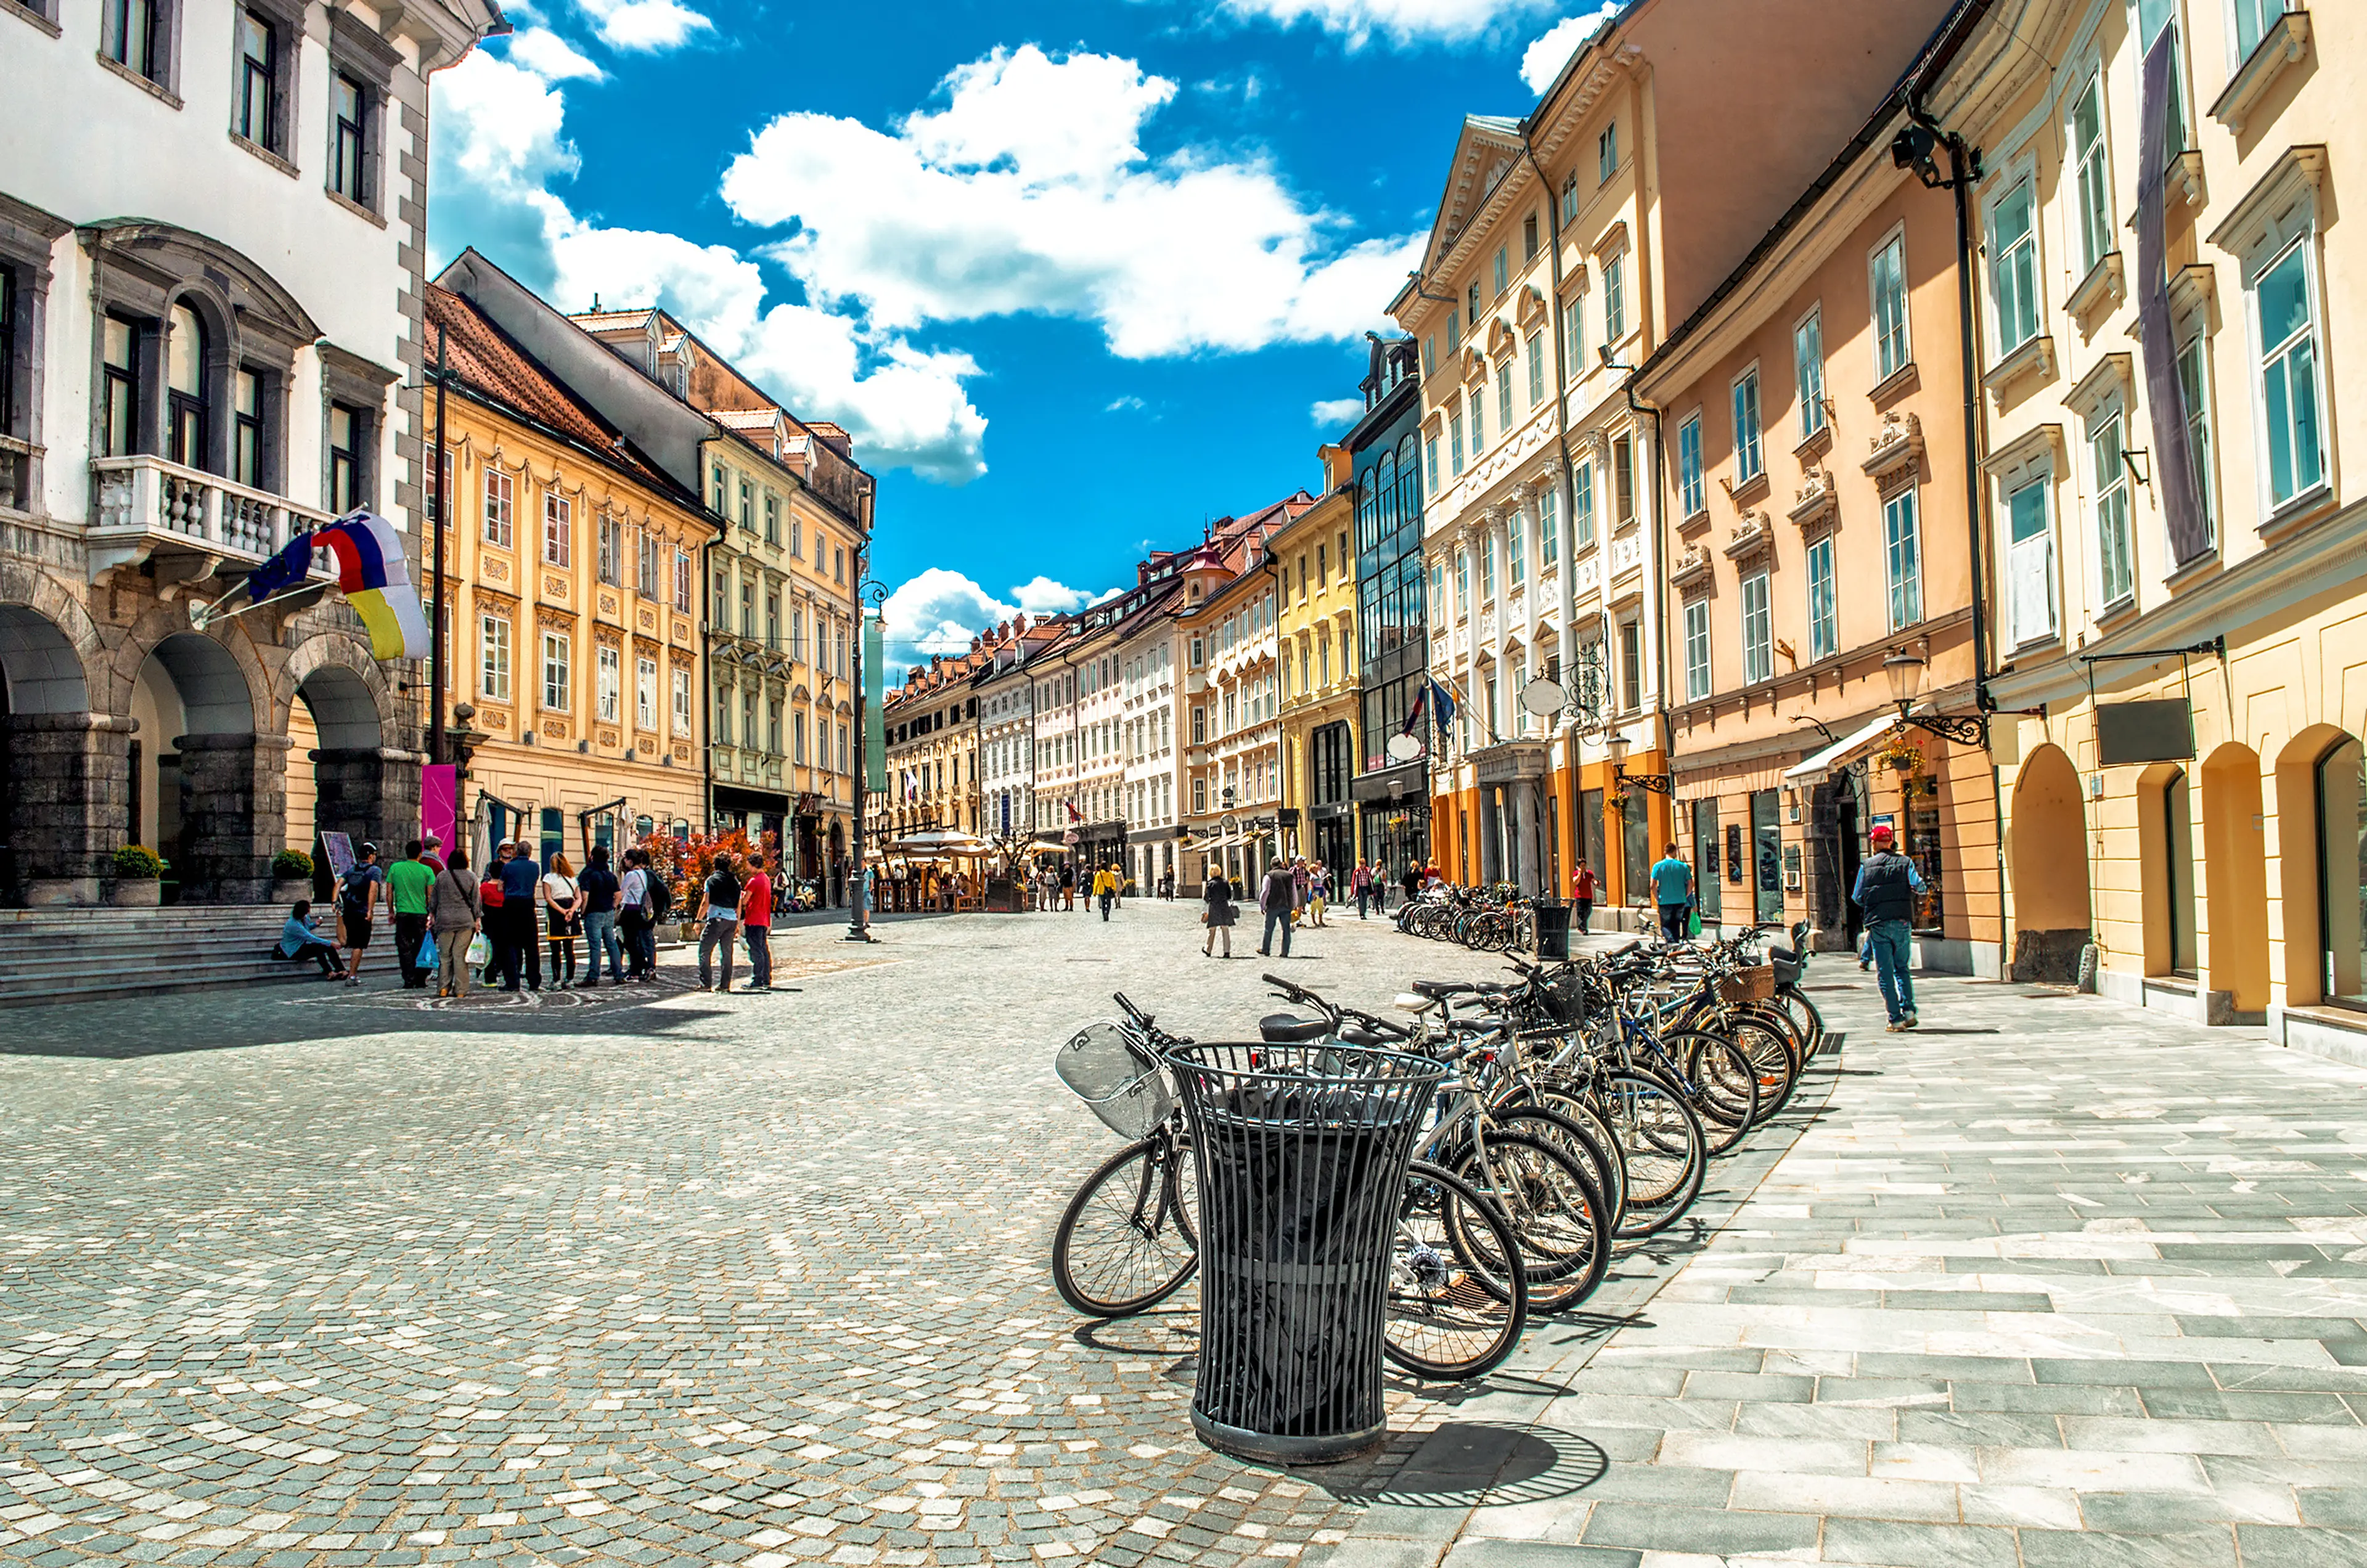 3-Day Ljubljana Adventure: Food, Wine, Nightlife and Sightseeing with Friends